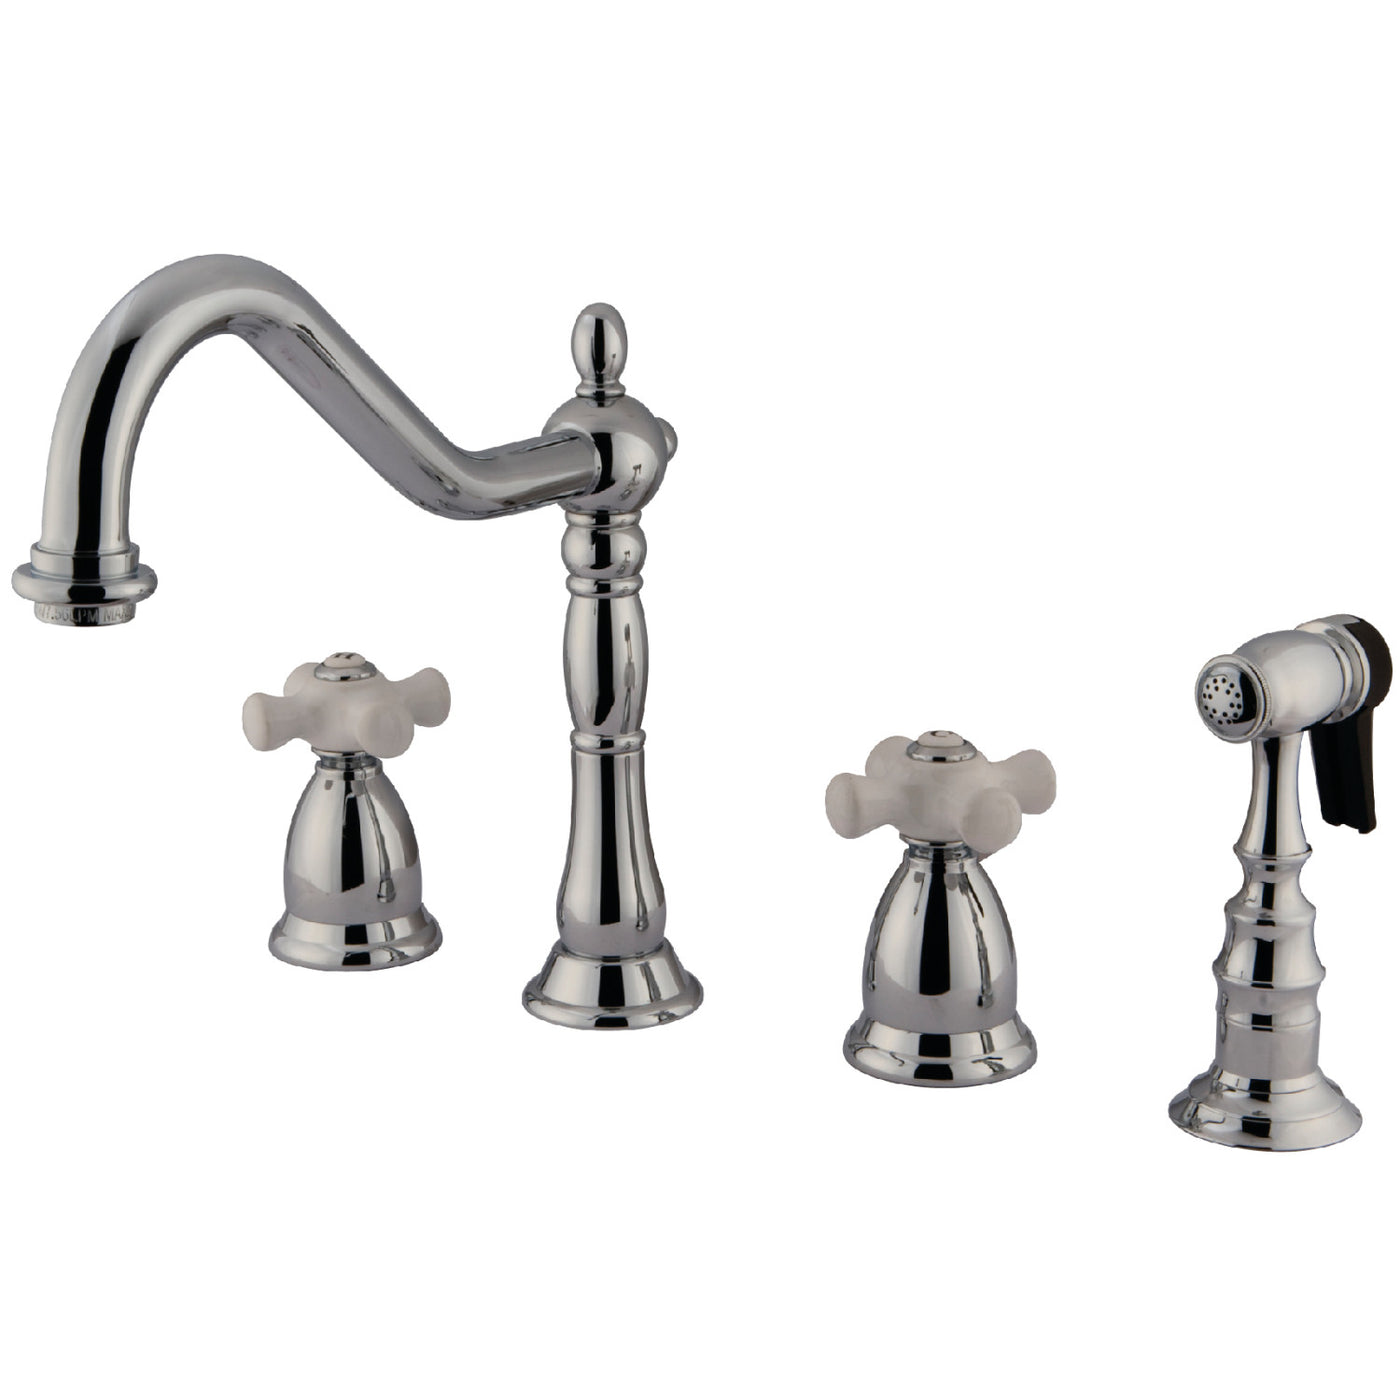 Elements of Design ES1791PXBS Widespread Kitchen Faucet with Brass Sprayer, Polished Chrome